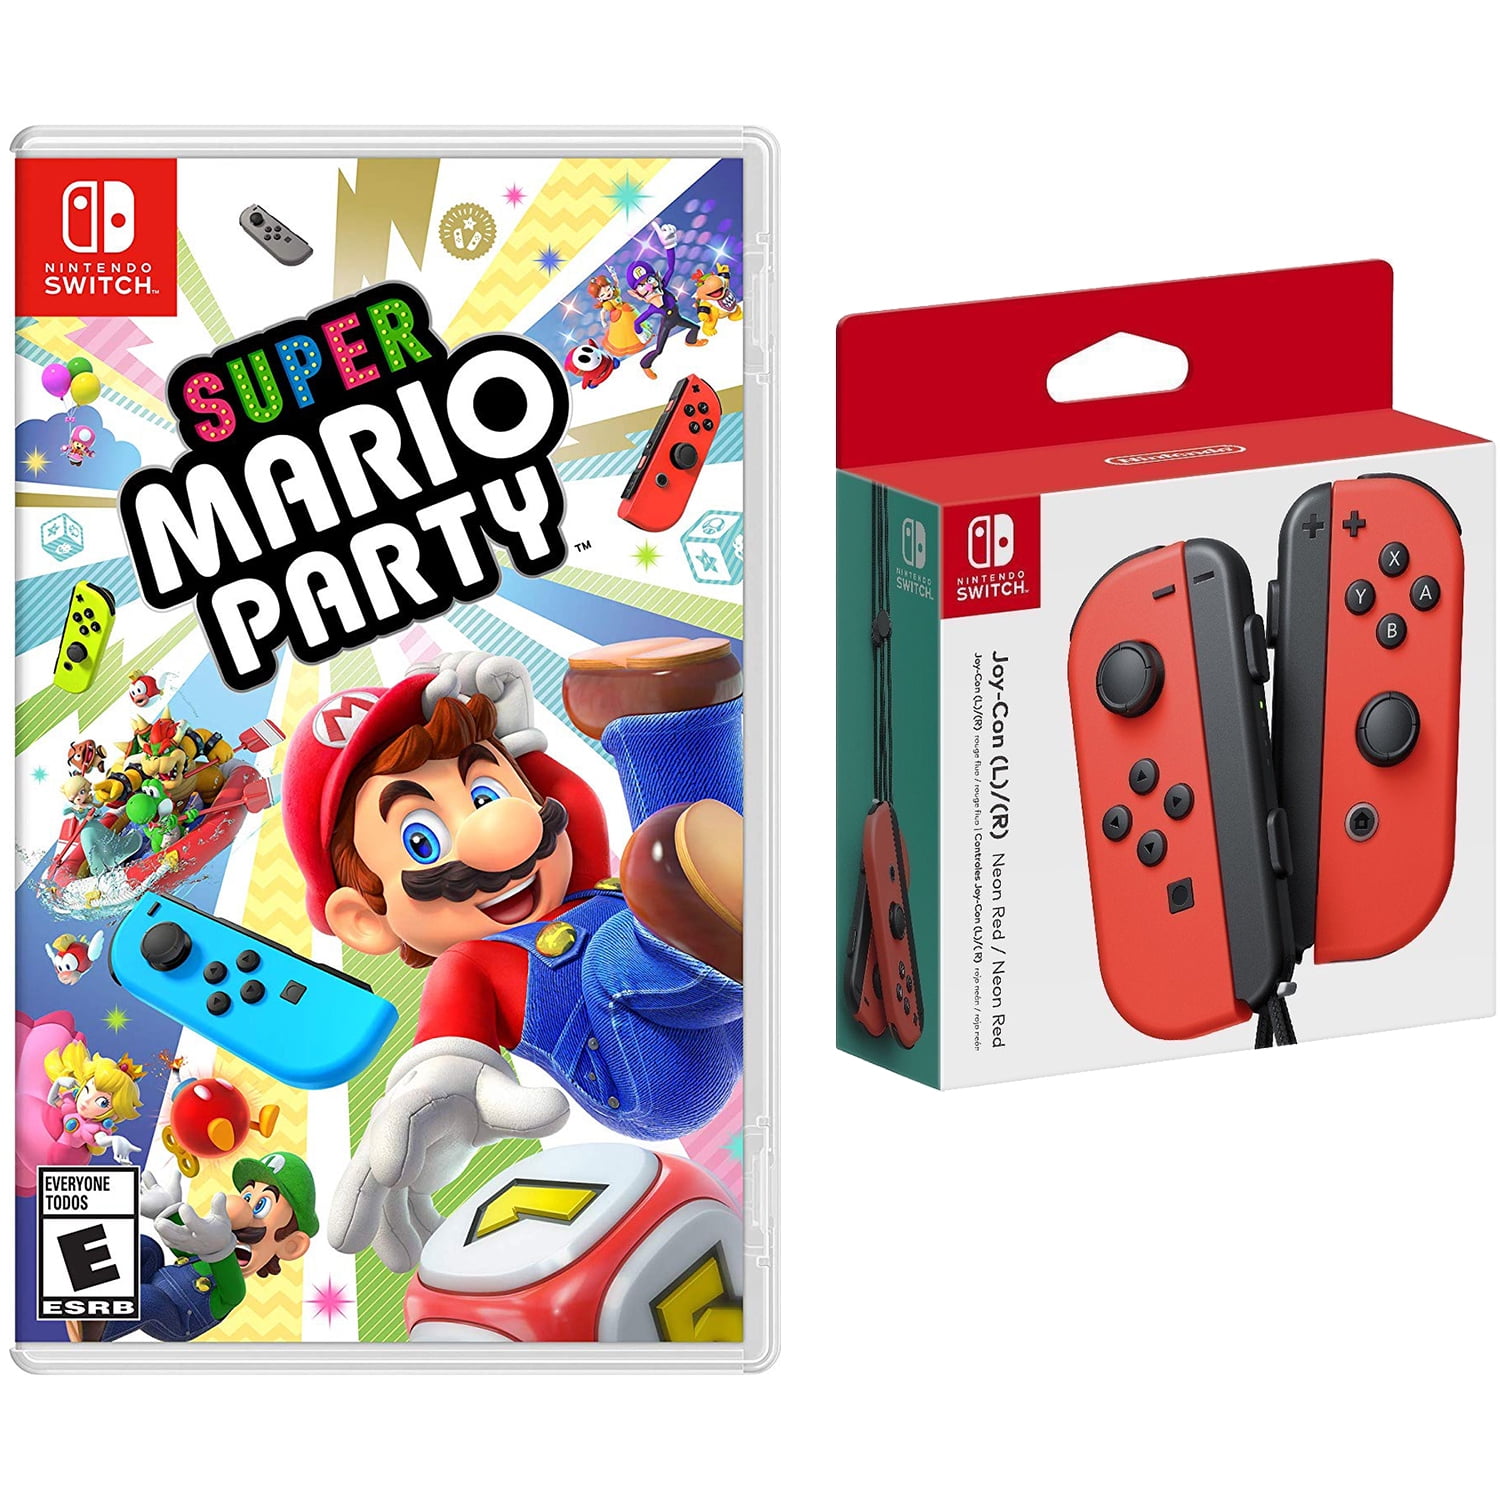 Nintendo Switch Super Mario Party and 